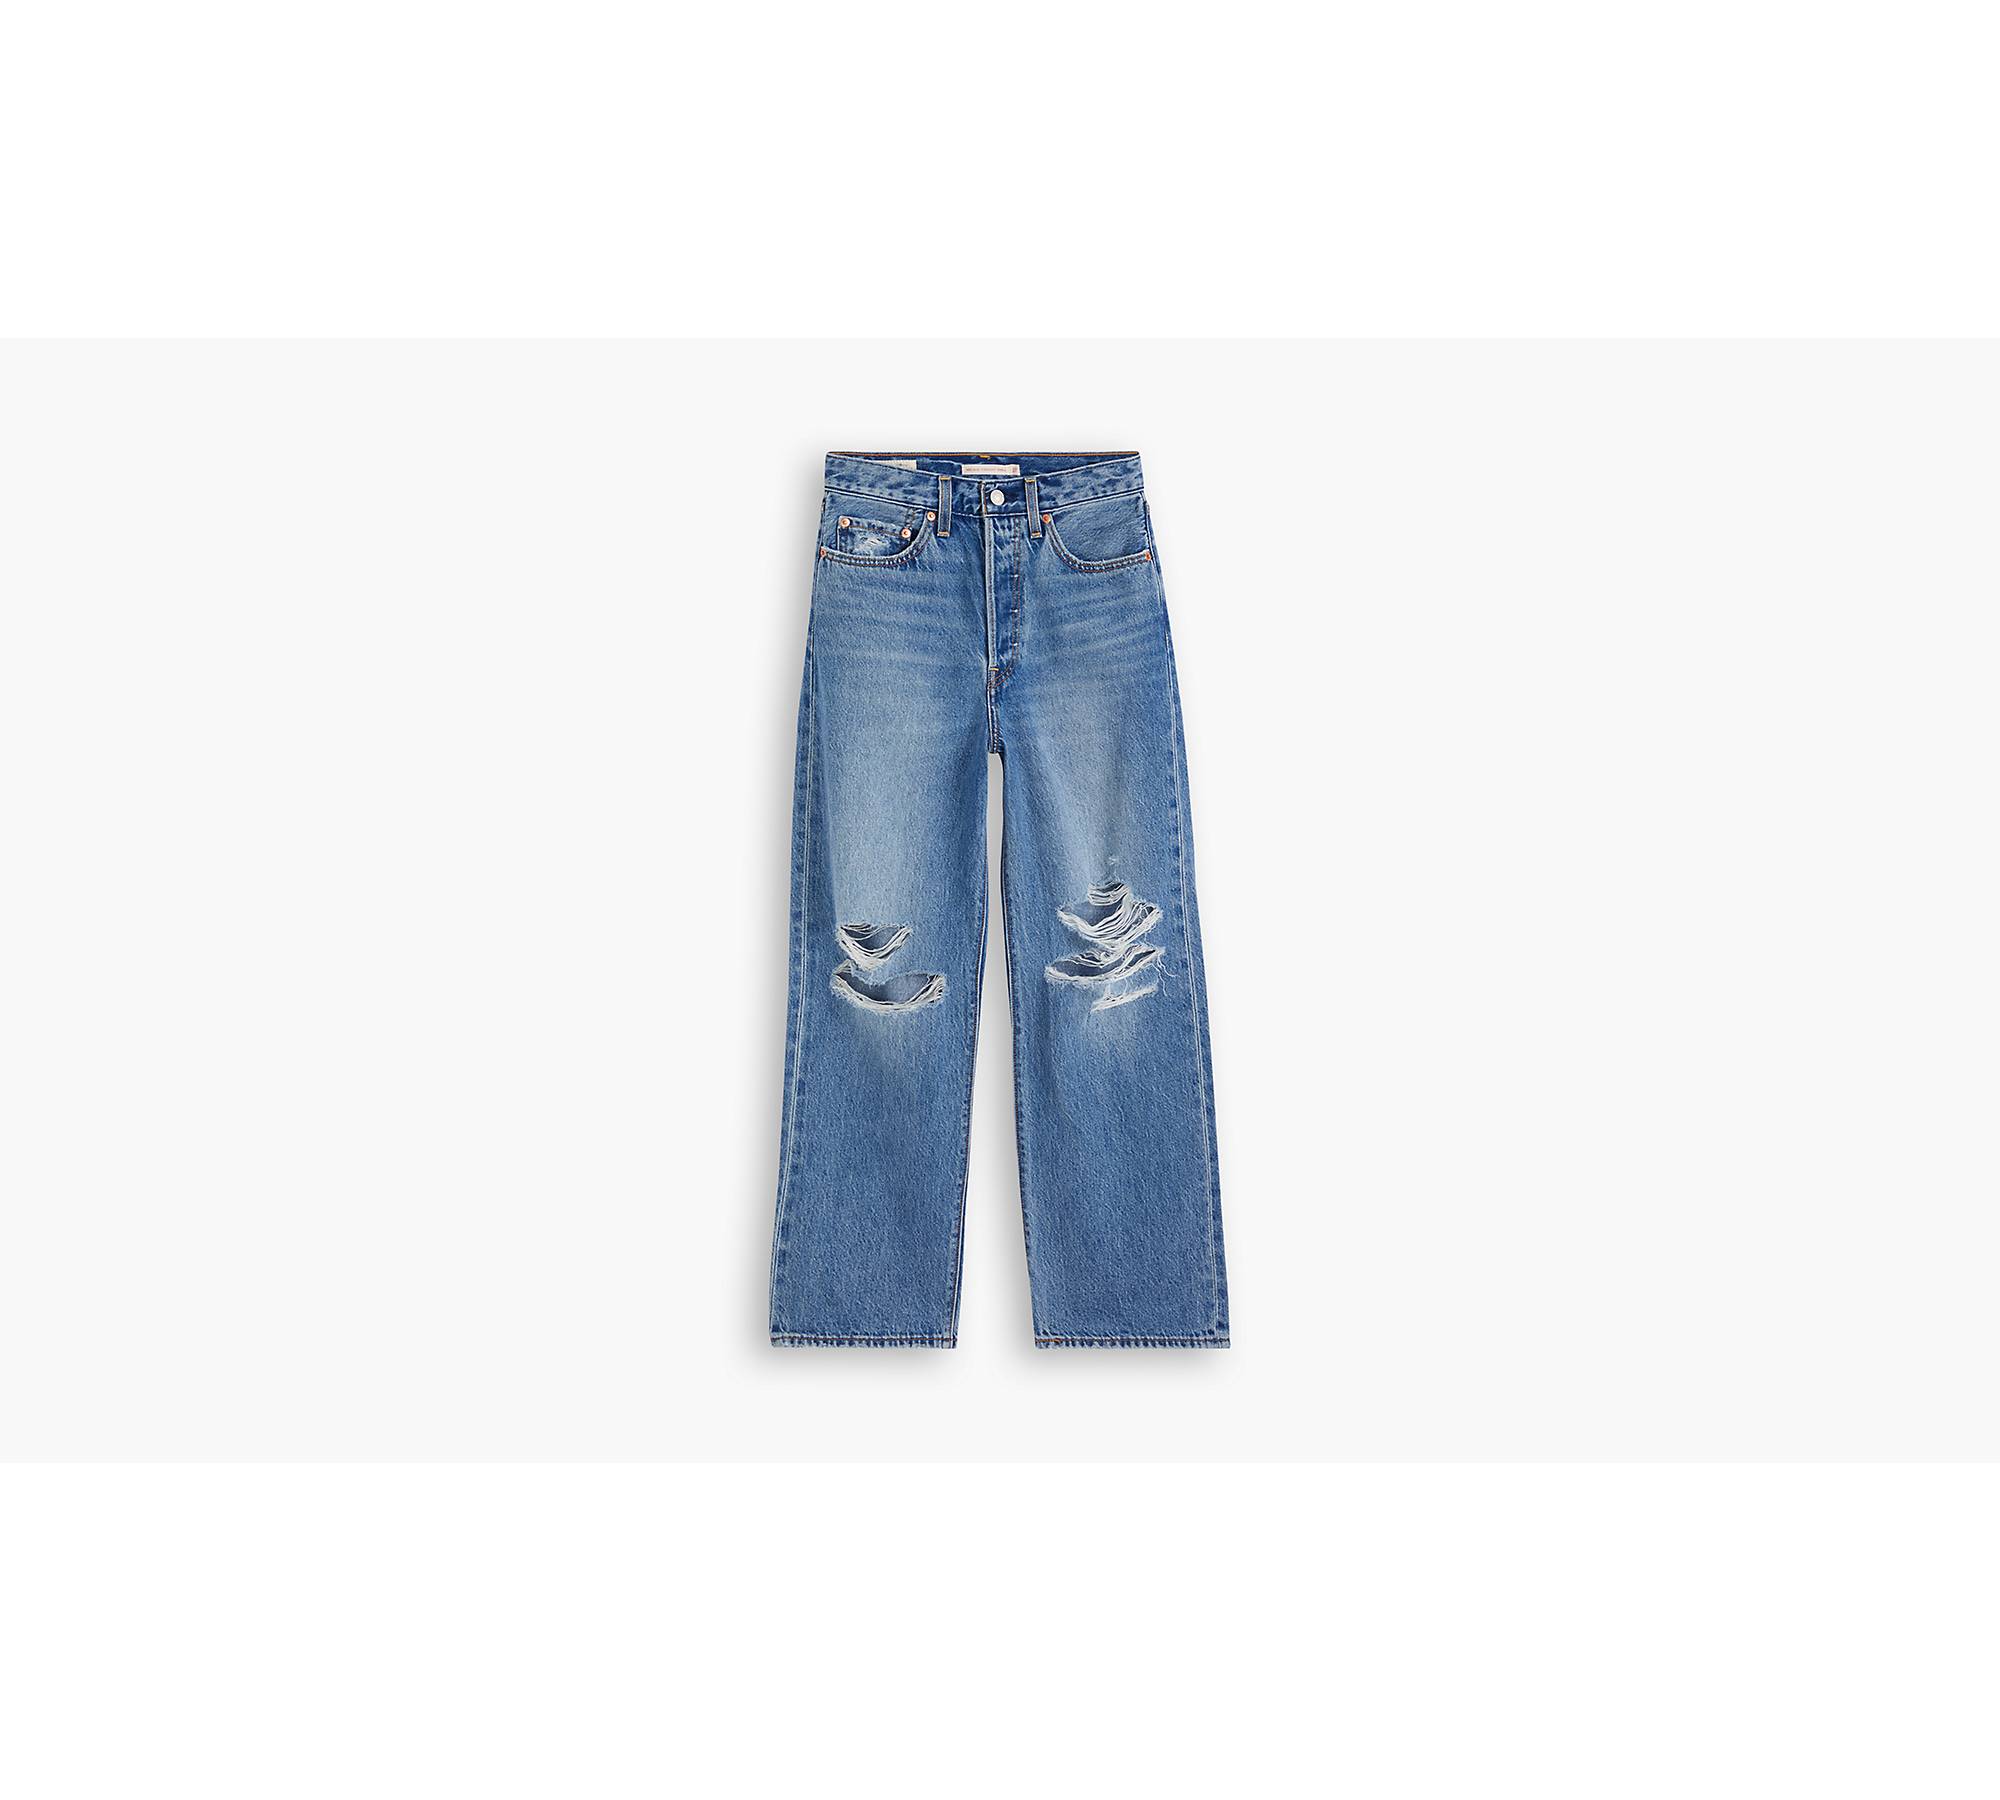 Jeans cropped flare - Pantalóns - BSK Teen